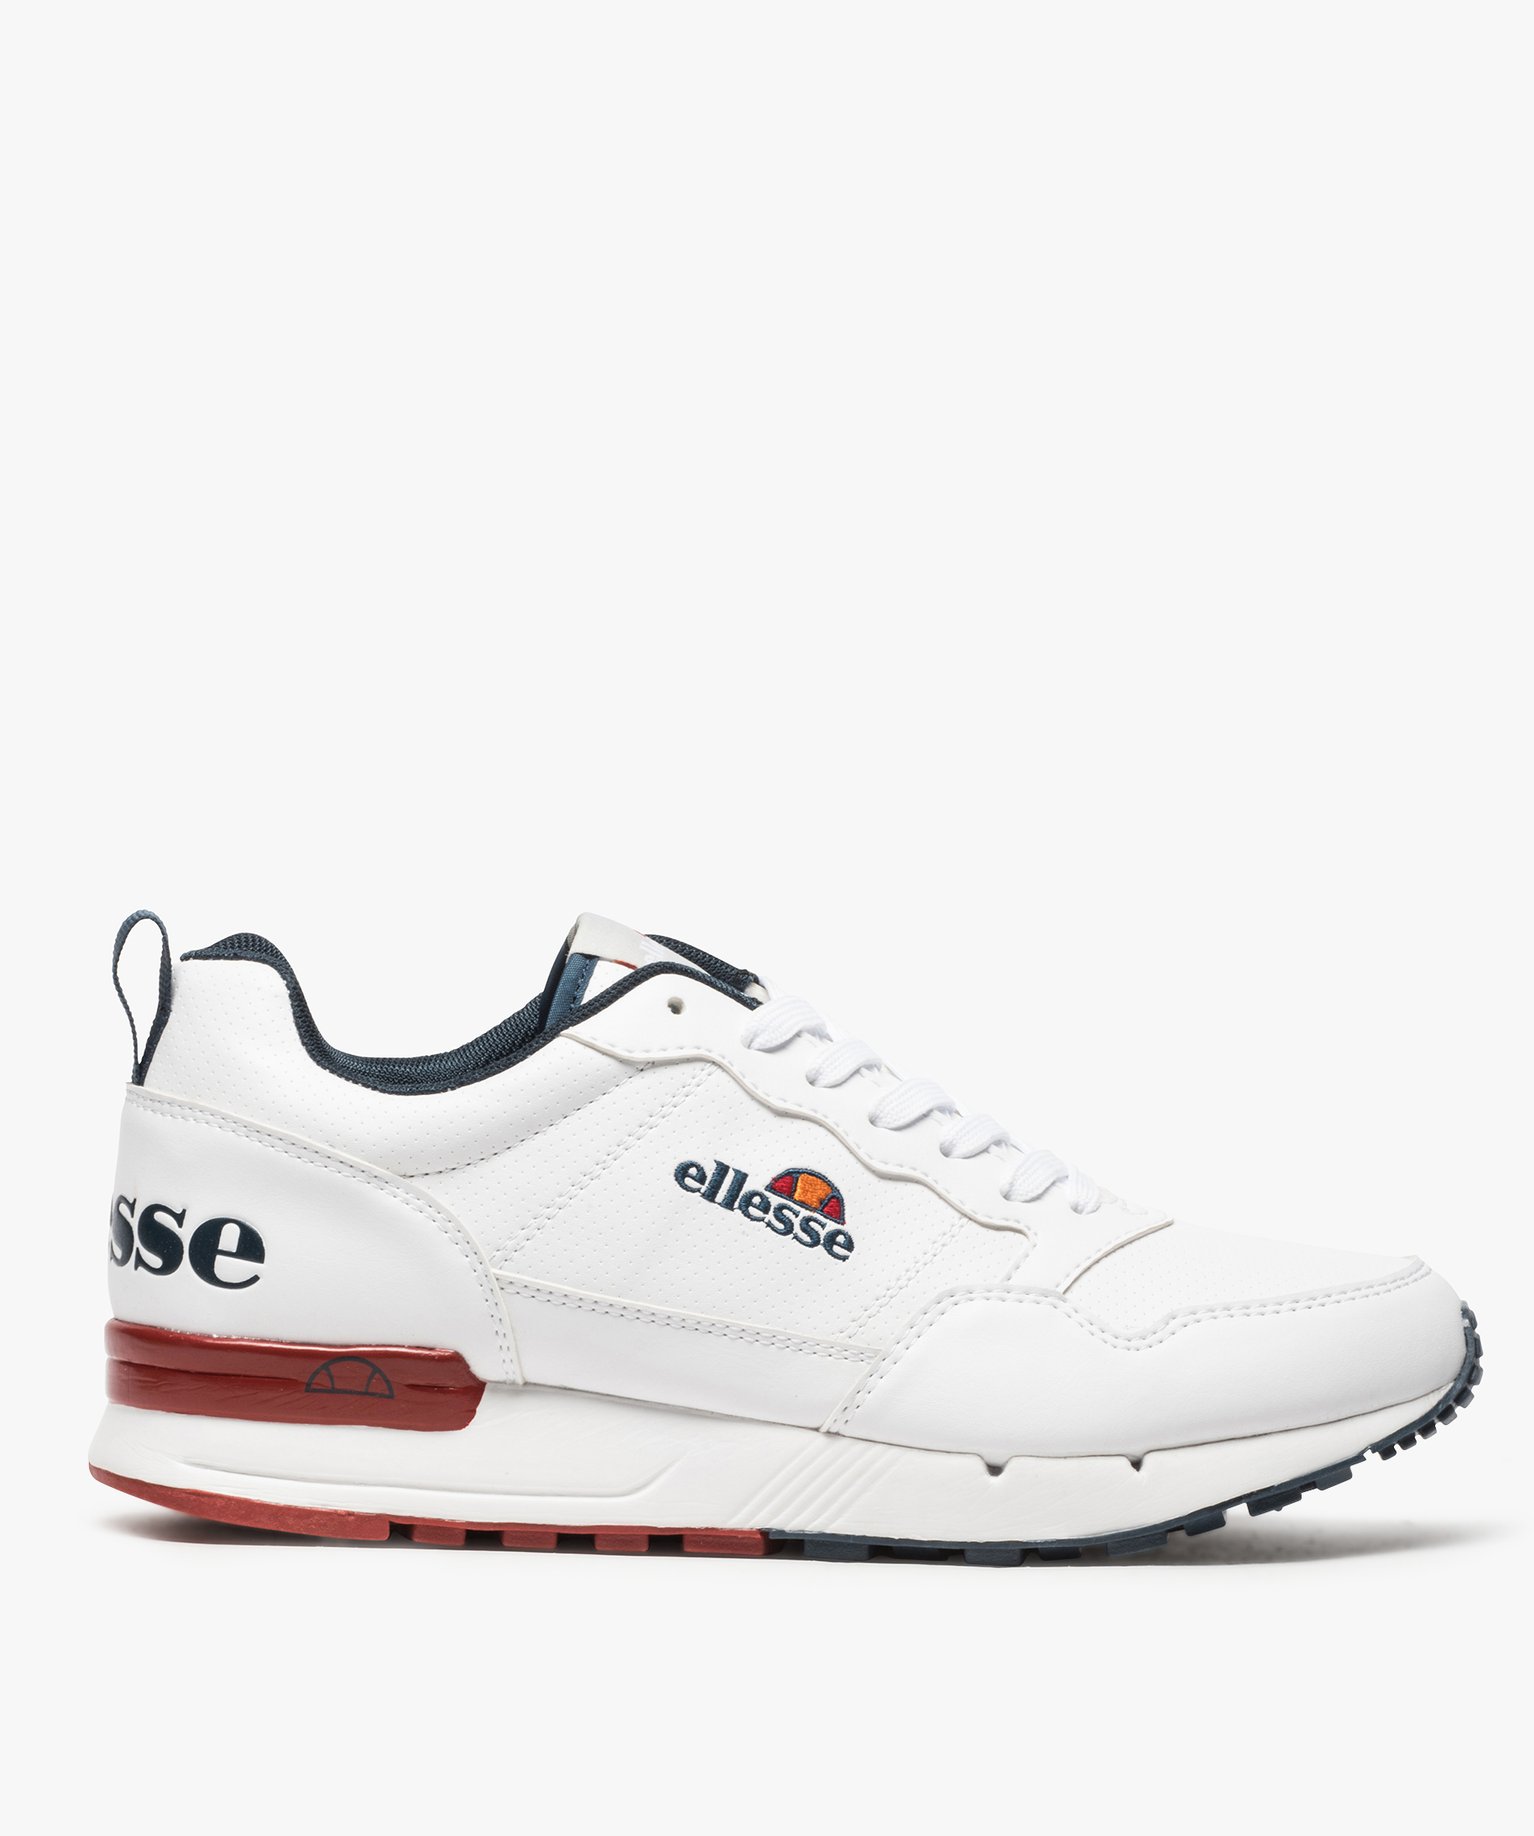 Overredend Contract Rentmeester Gemo chaussures baskets homme retro running - ellesse blanc homme | GÉMO